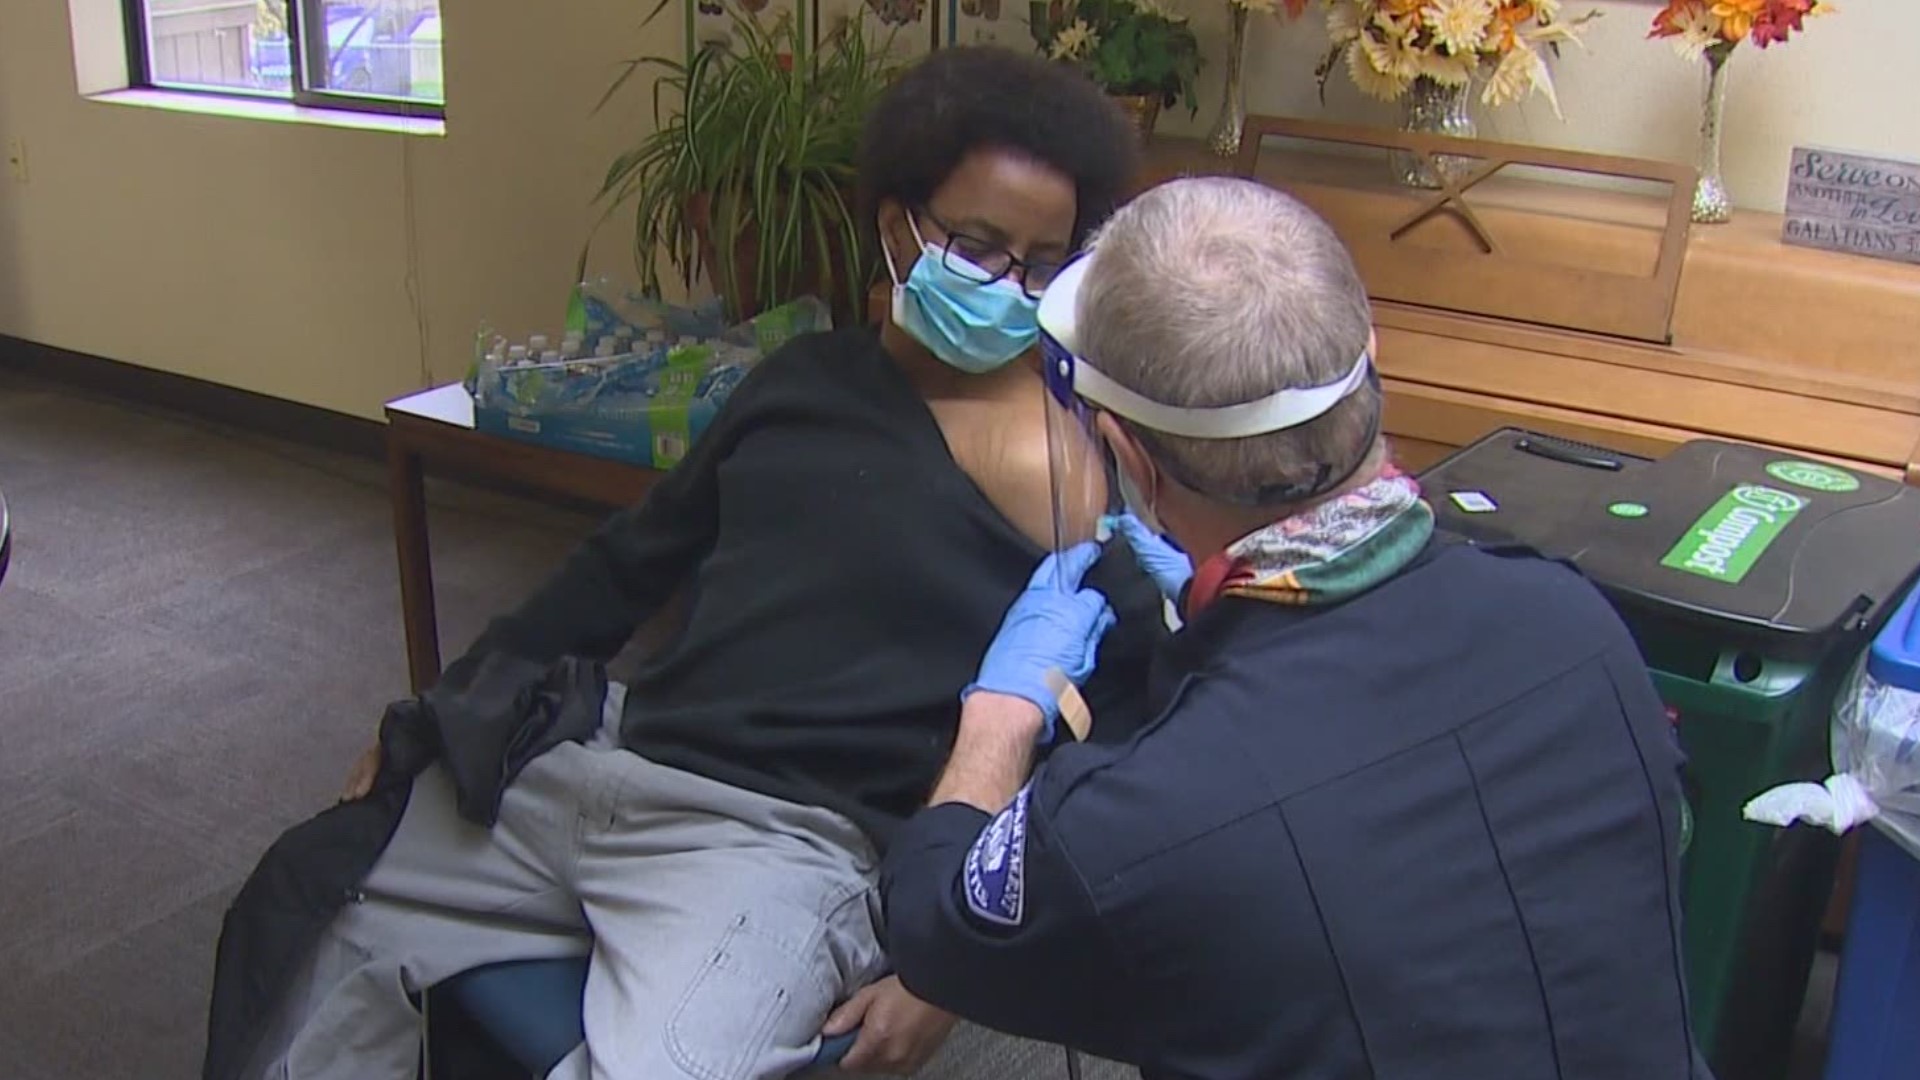 Groups like the Seattle Fire Department are working tirelessly to take vaccines right to the homes of the most vulnerable people.